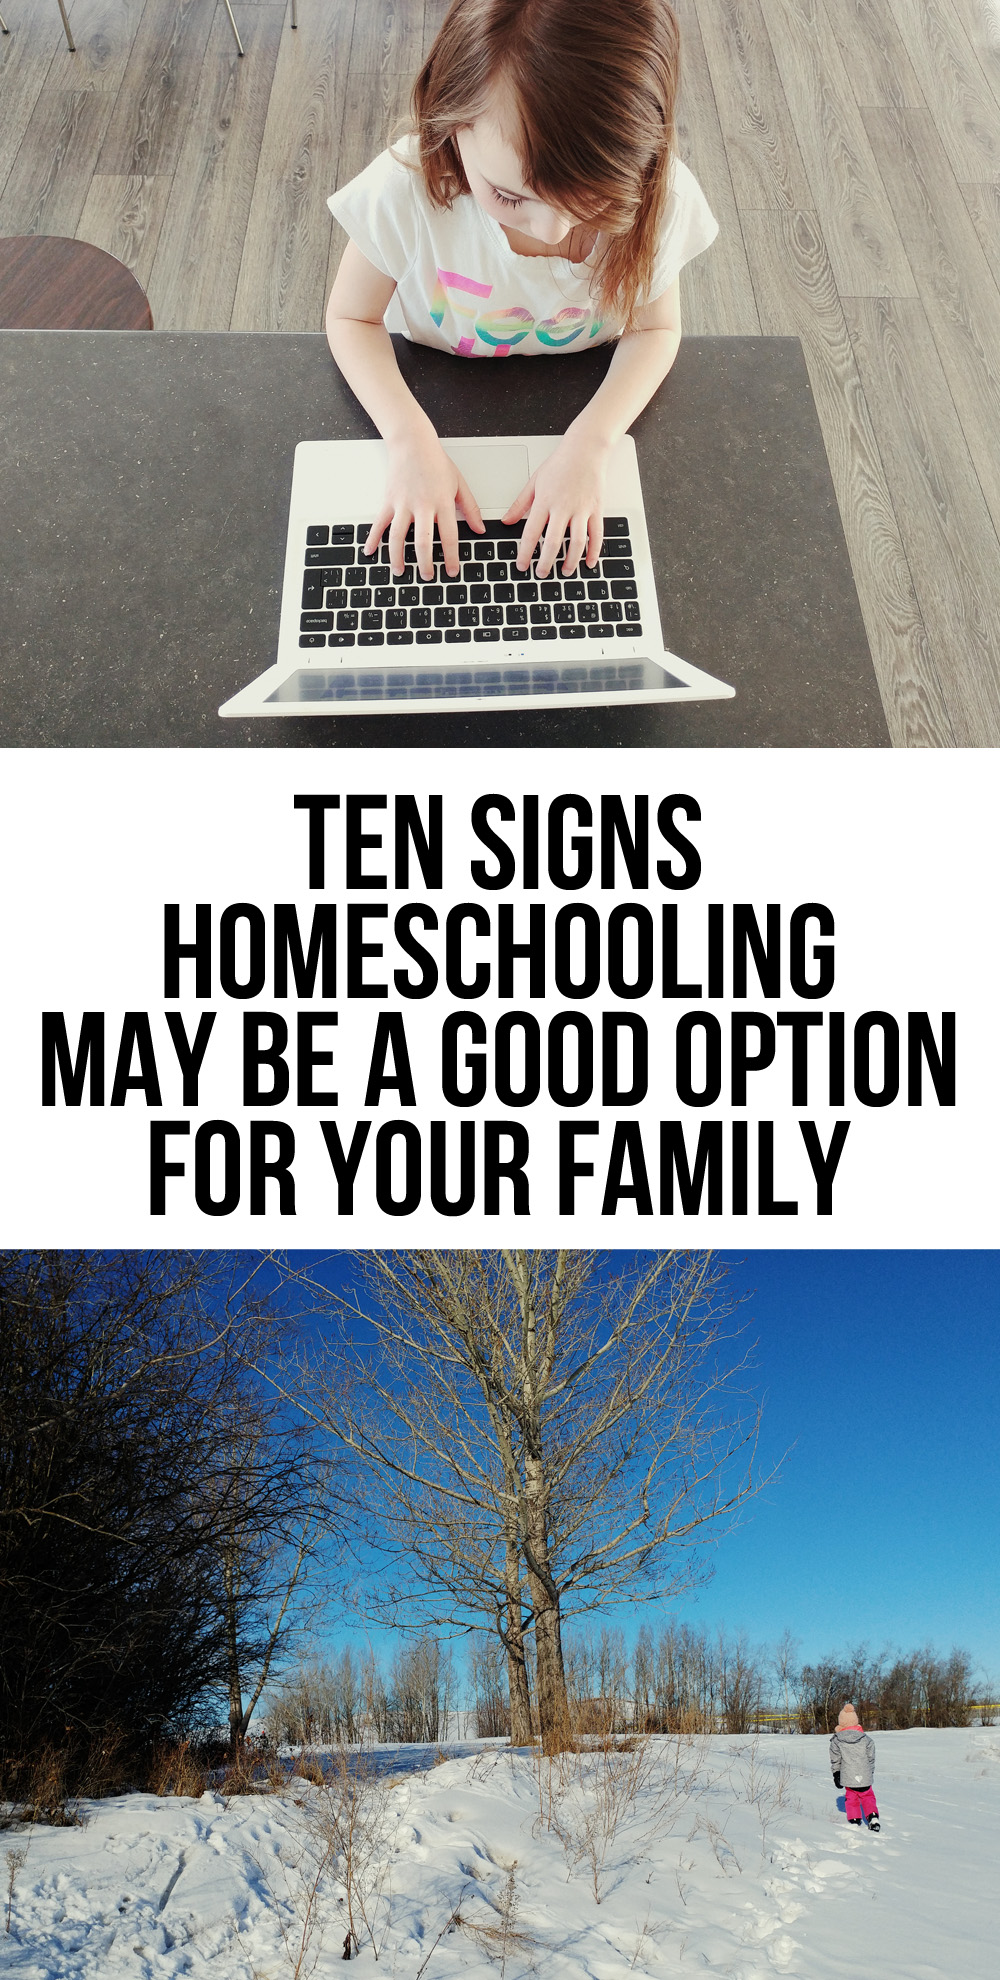 Wondering if homeschooling is the best option for your family? Here are ten signs that homeschooling may be the best option for your family.